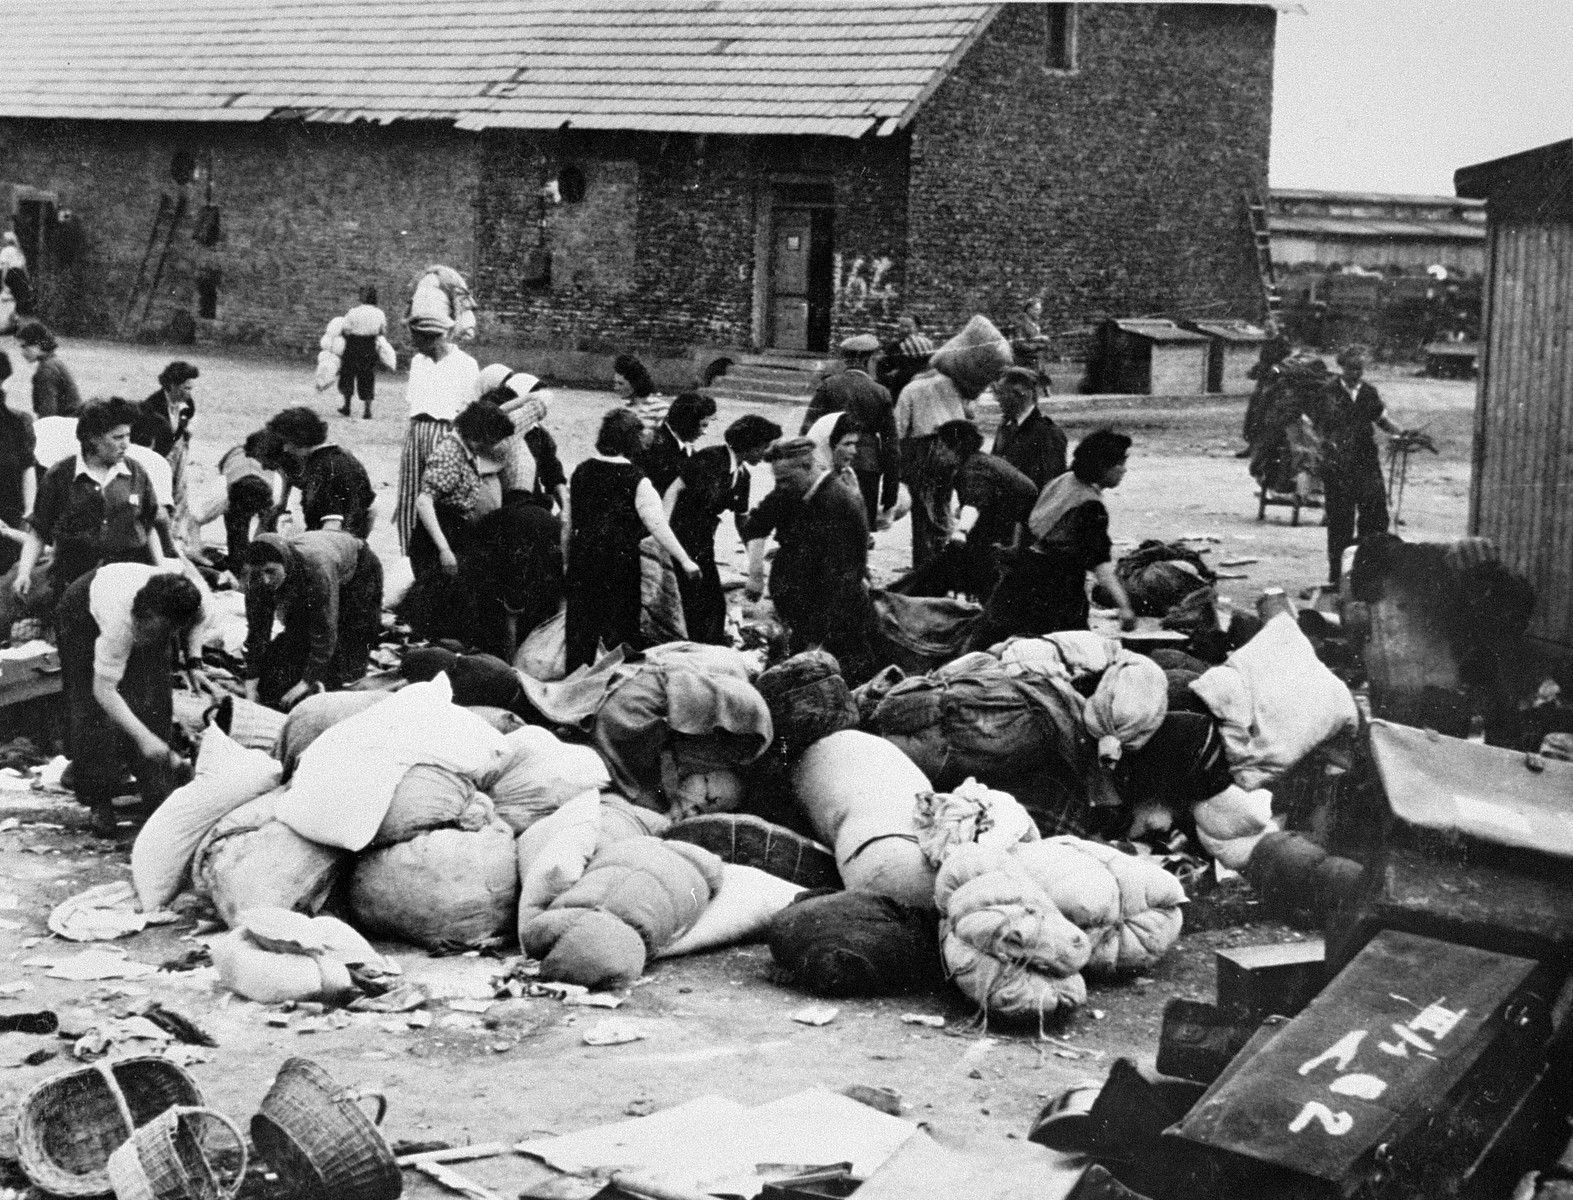 Prisoners in the Aufräumungskommando (order commandos) unload the confiscated property of a transport of Jews from Subcarpathian Rus at a warehouse in Auschwitz-Birkenau.

The camp prisoners came to refer to the looted property as "Canada," associating it with the riches symbolized by Canada.  The members of this commando were almost exclusively Jews.  "Canada" storage facilities occupied several dozen barracks and other buildings around the camp.  The looted property was funneled from Auschwitz through an extensive distribution network that served many individuals and various economic branches of the Third Reich.